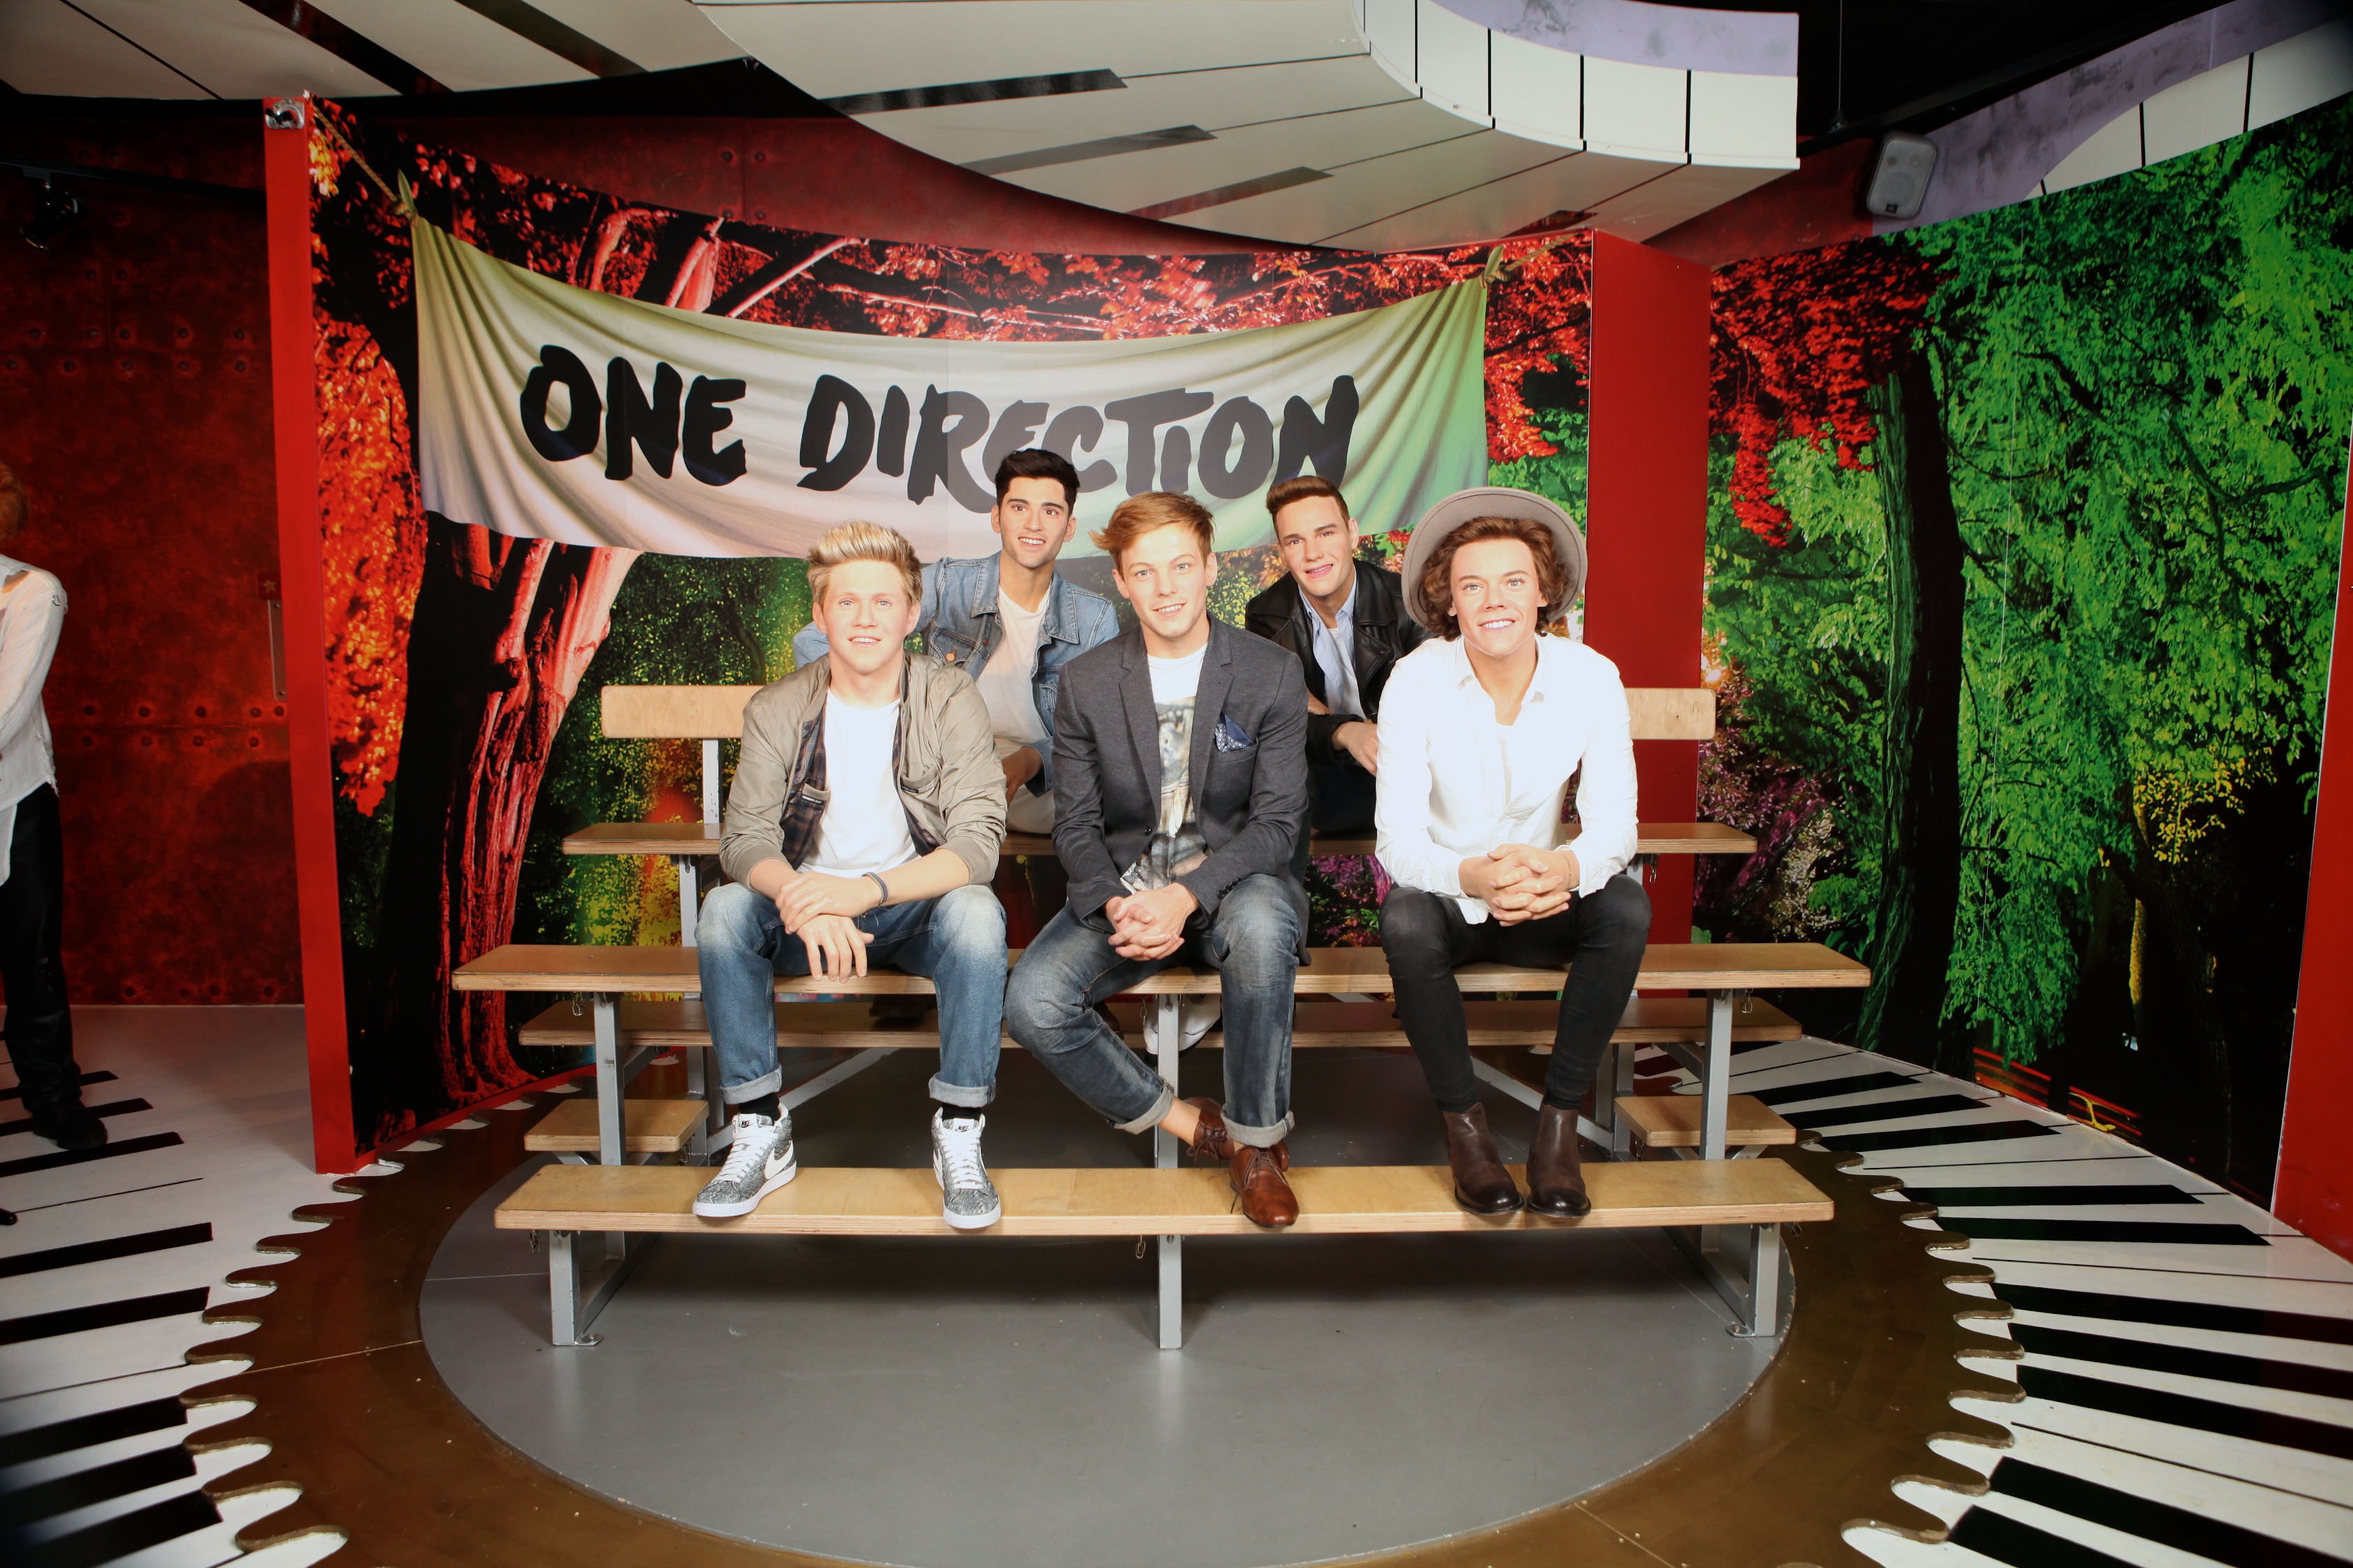 One Direction wax figures at Madame Tussauds Blackpool